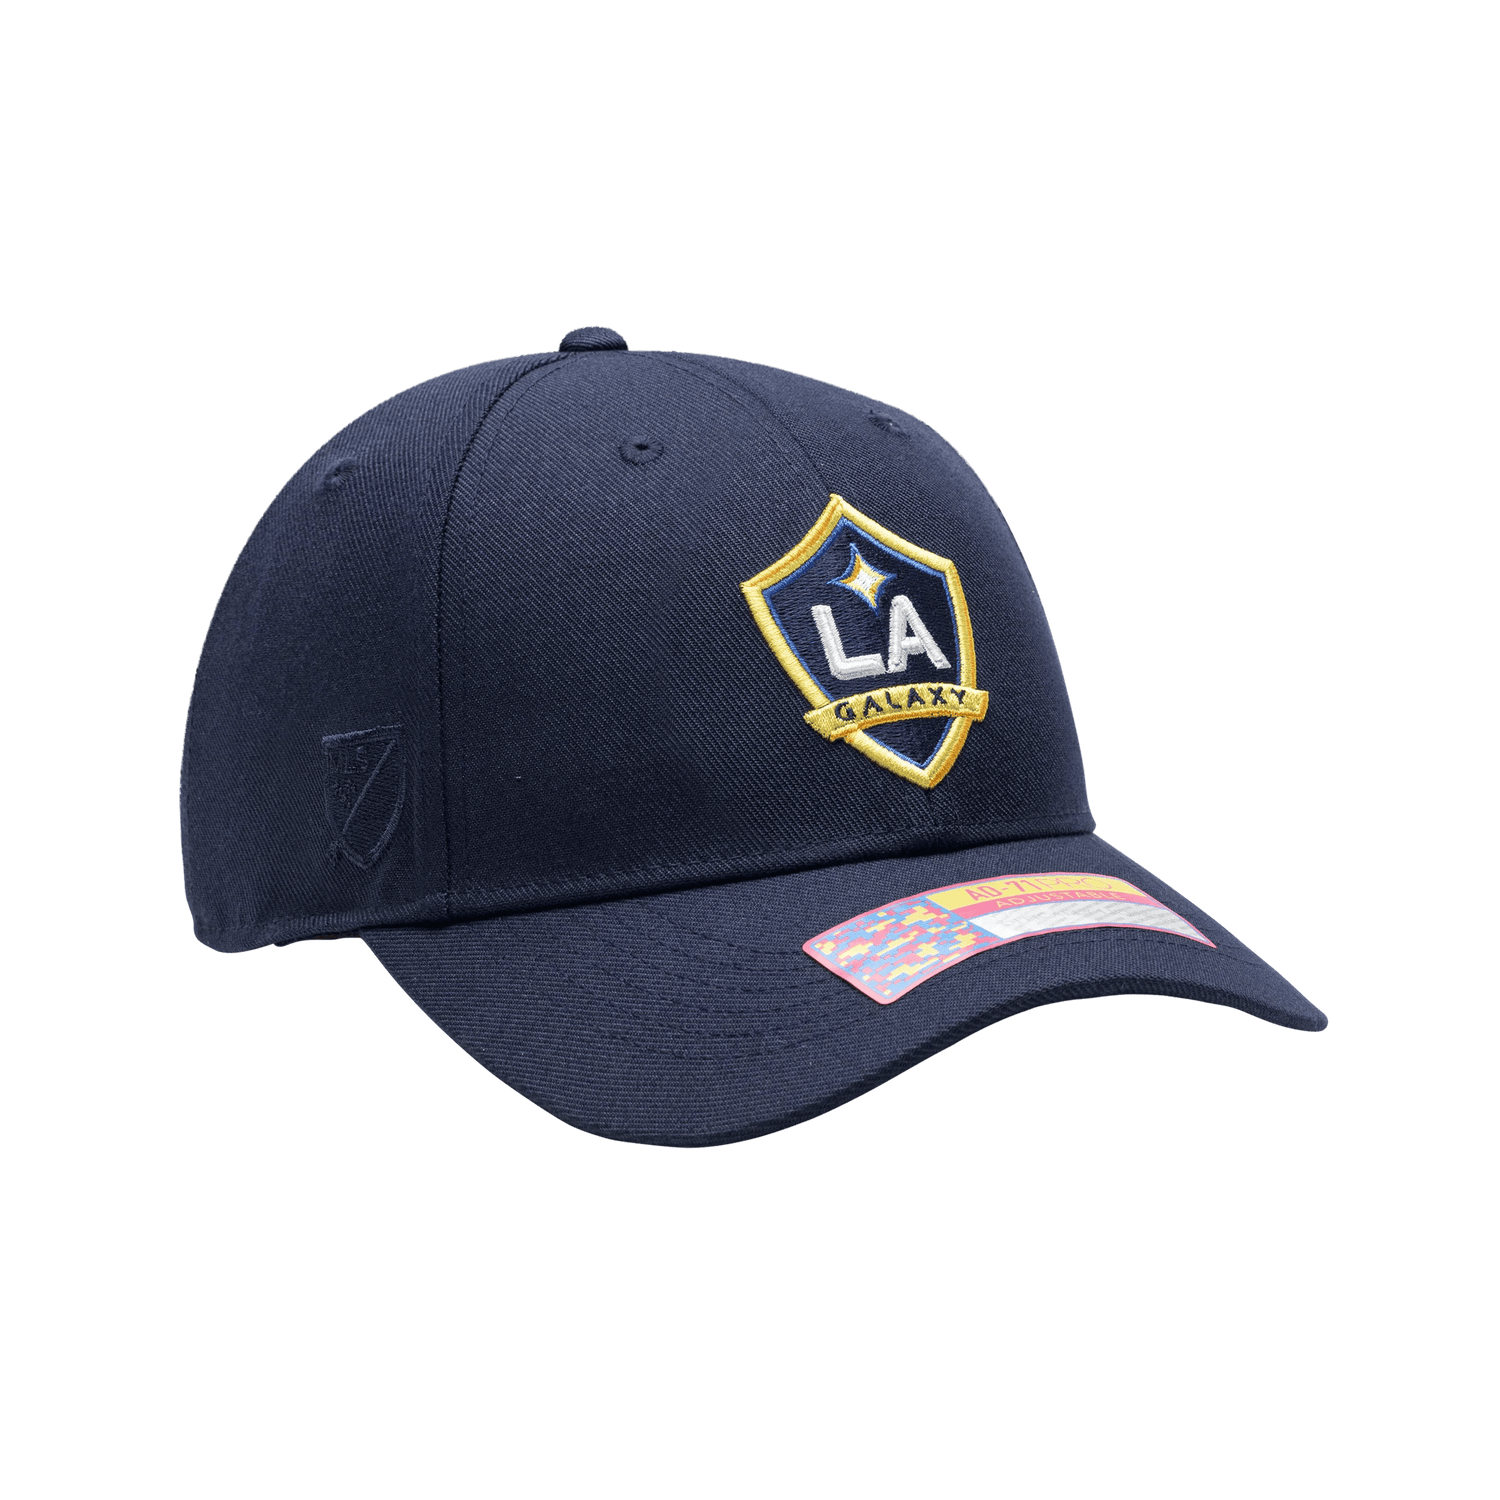 FI Collection LA Galaxy Standard Adjustable Cap (Lateral - Side 2)